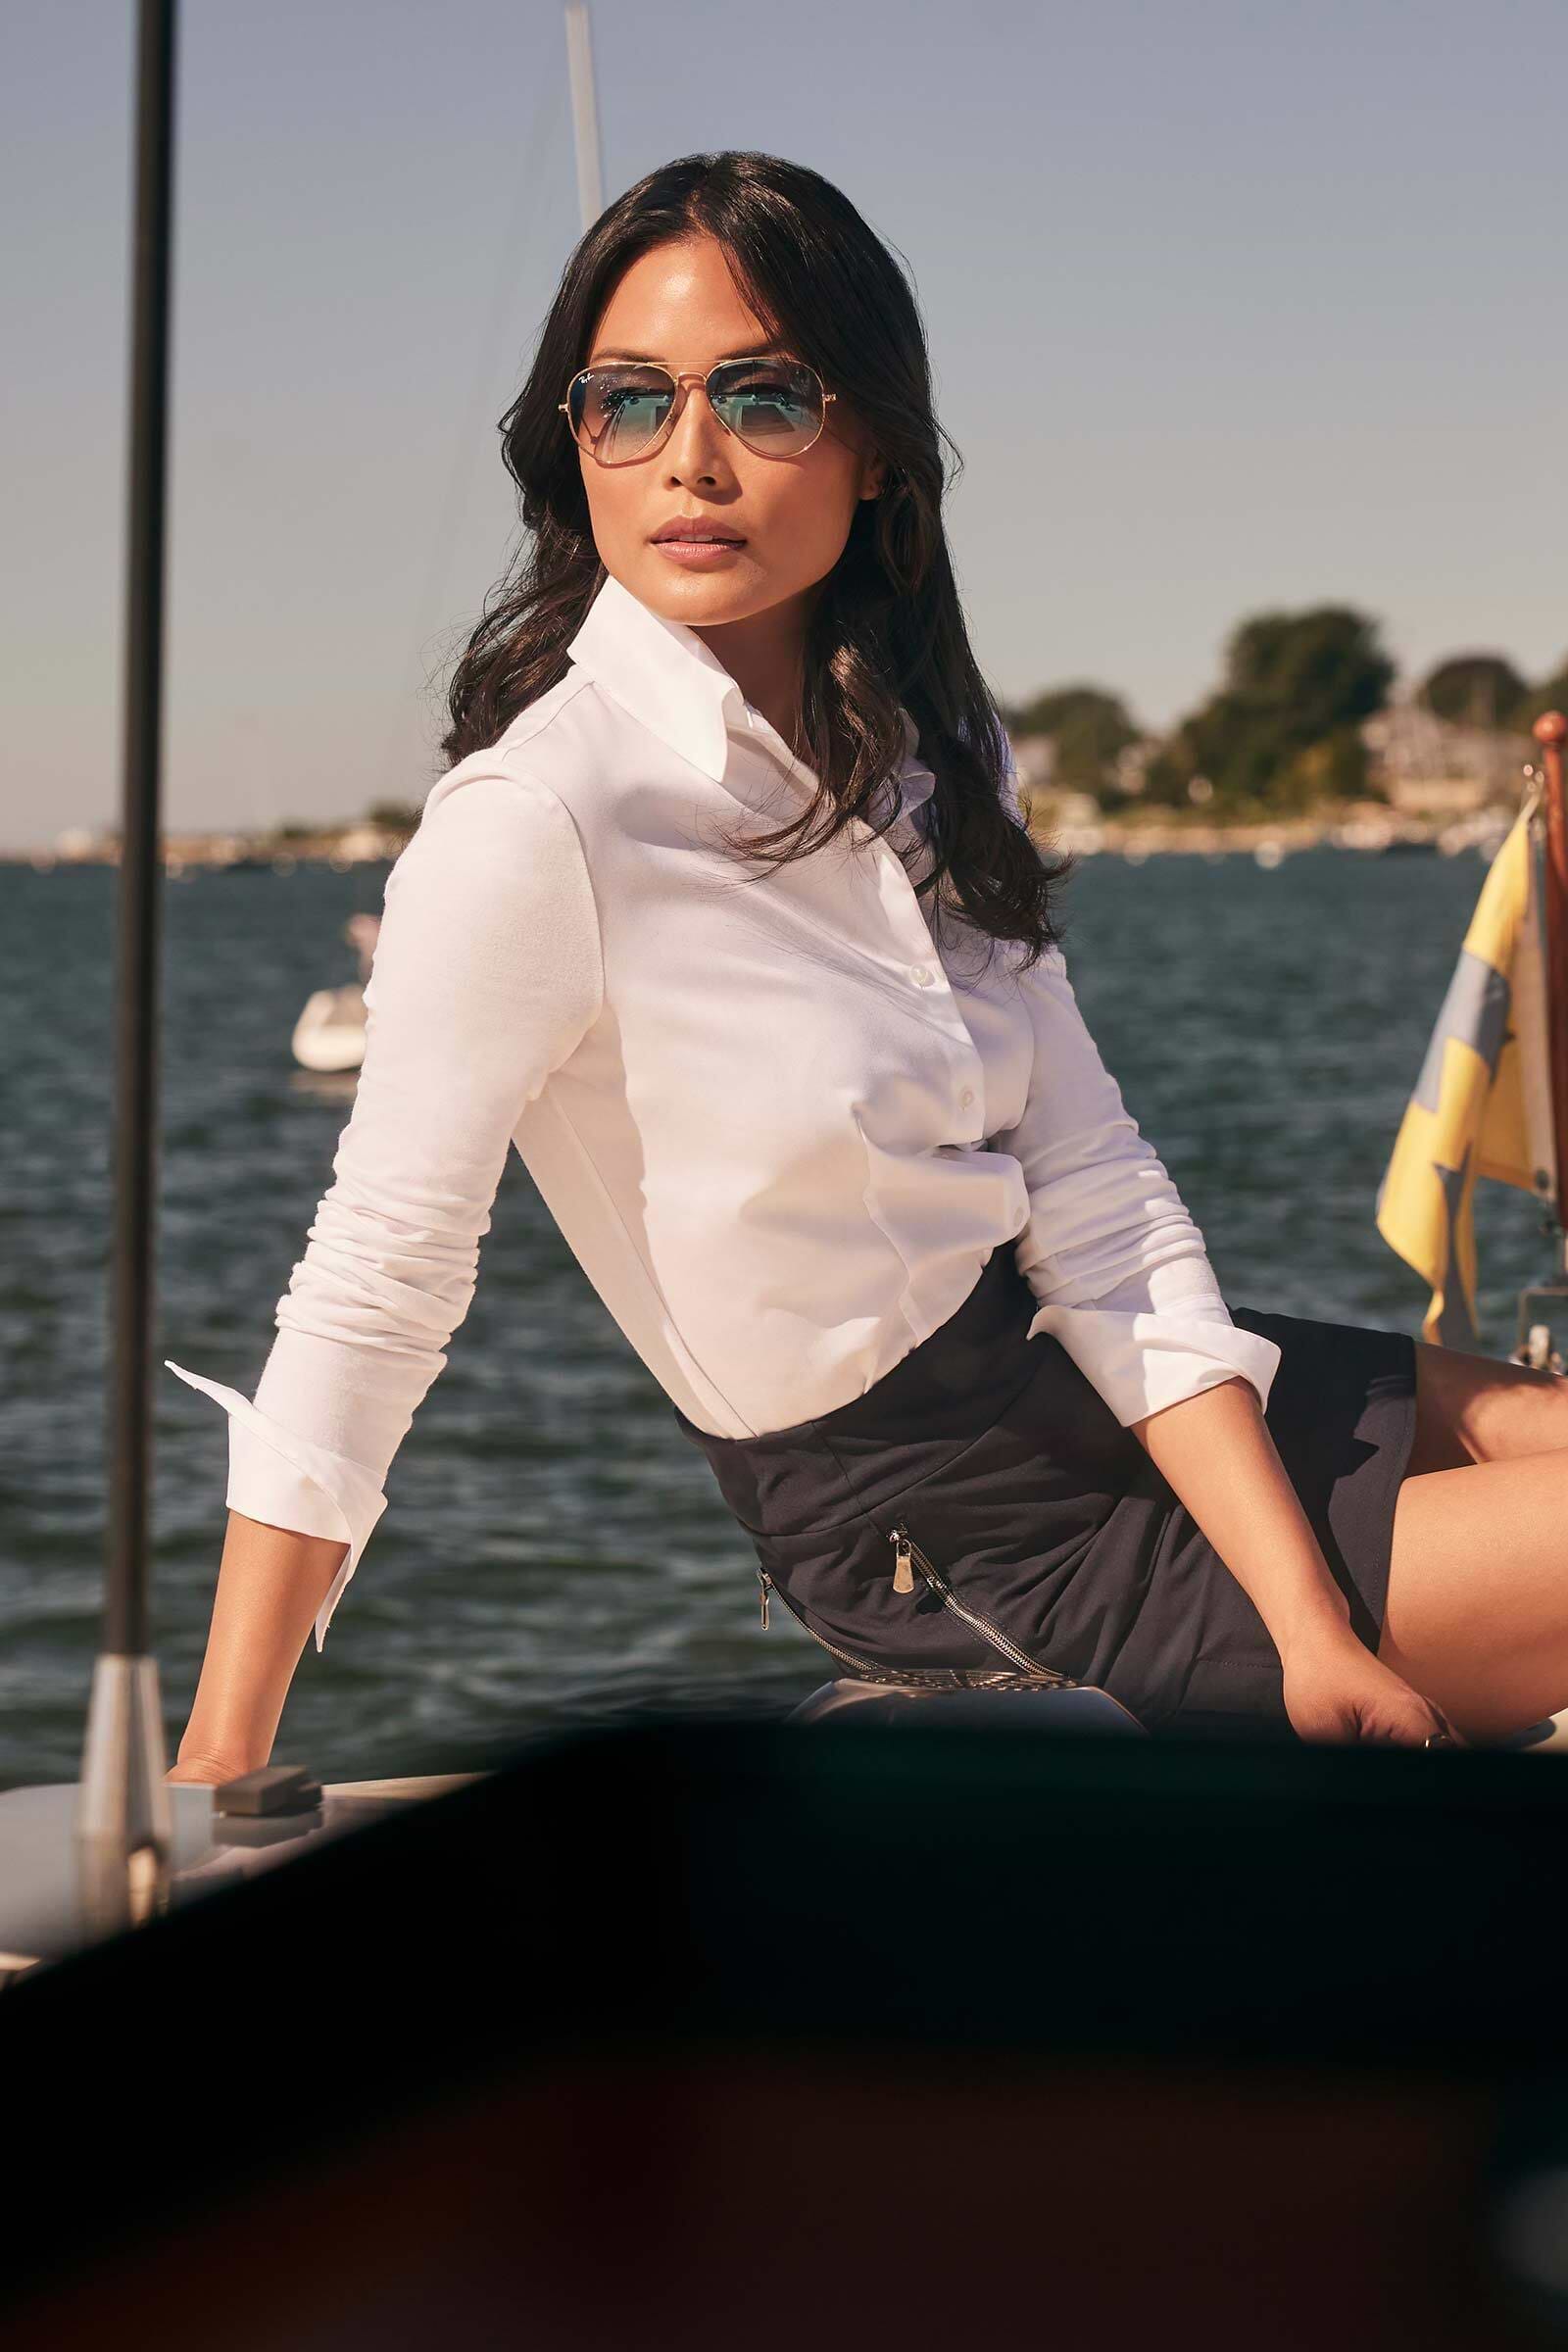 The Best Travel Button Down Poplin Shirt. Woman on a Yacht Showing the Side Profile of an Alida Button Down Poplin Shirt in White